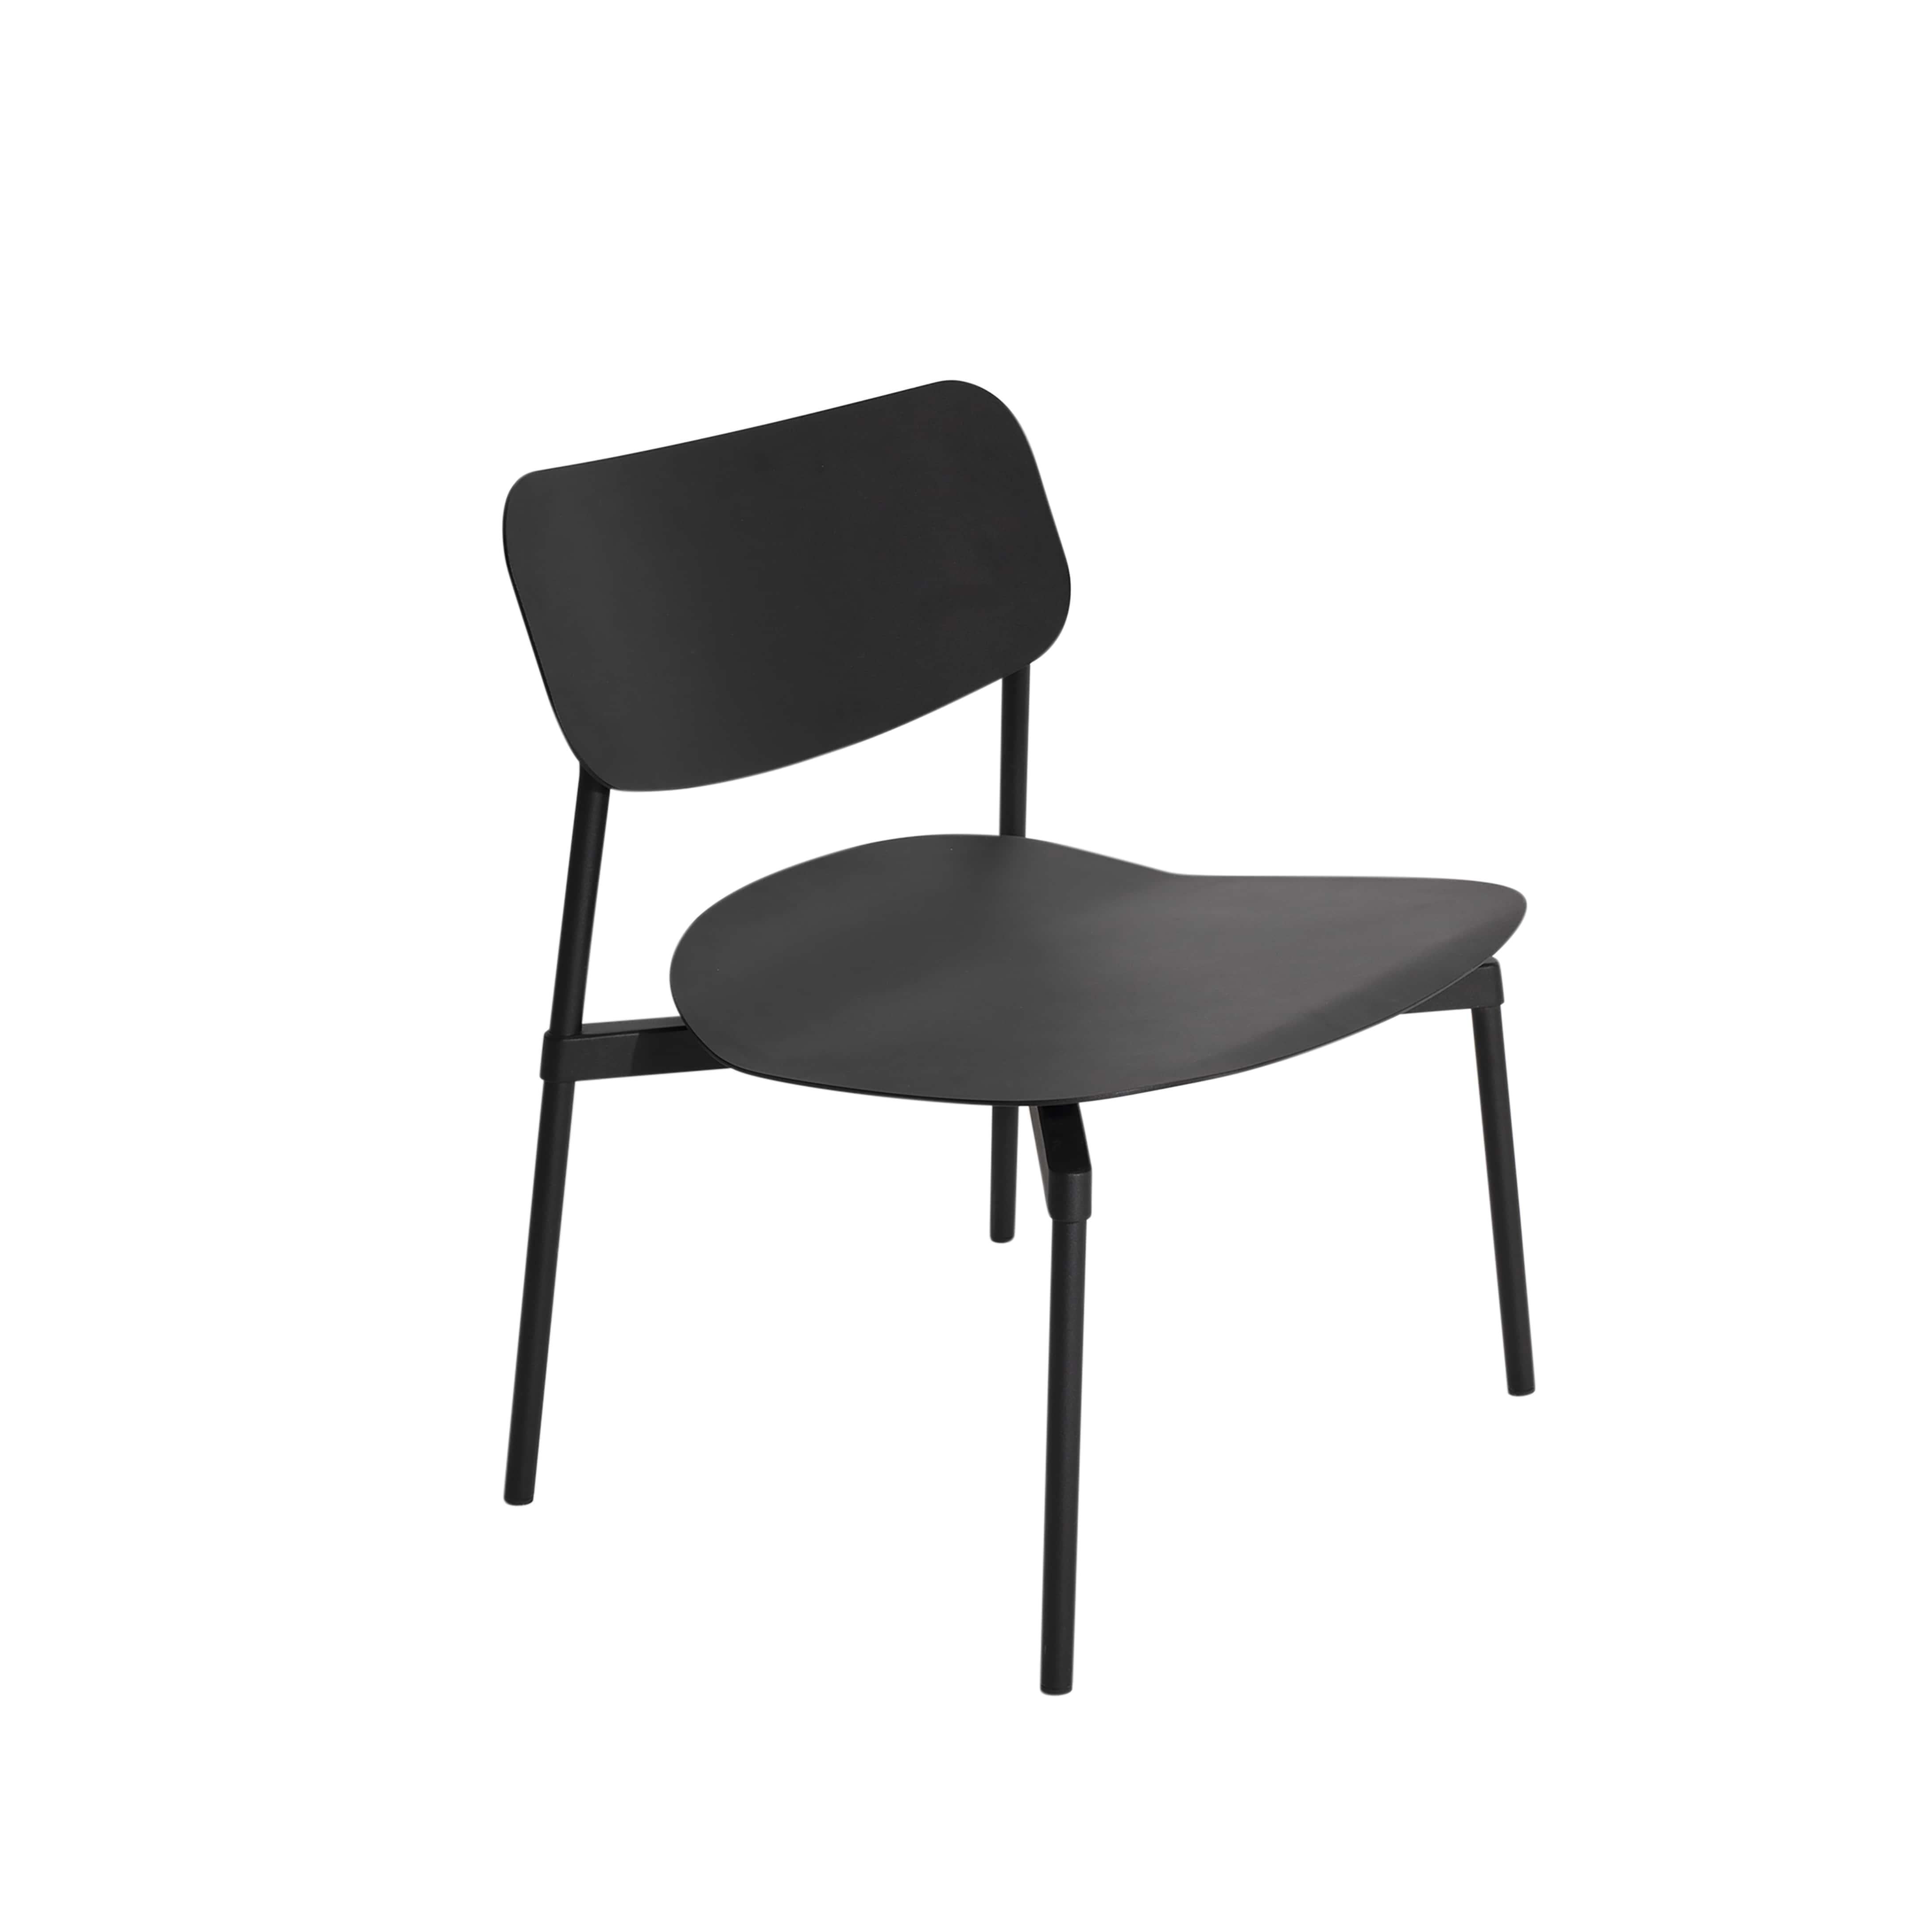 Petite Friture Fromme Lounge Armchair in Black Aluminium by Tom Chung, 2020

The Fromme collection stands out by its pure line and compact design. Absorbers placed under the seating gives a soft and very comfortable flexibility to seats. Made from